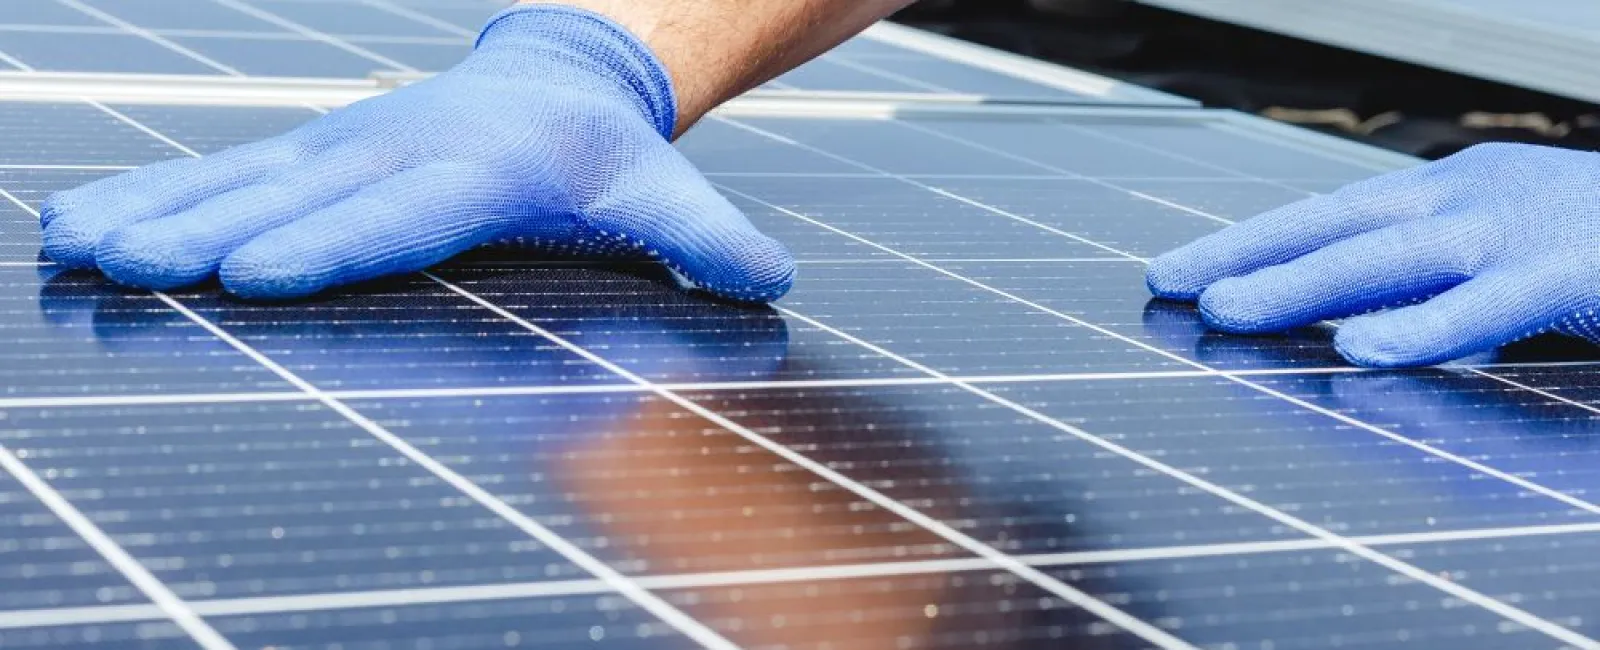 Key Things To Consider Before Installing Solar Panels